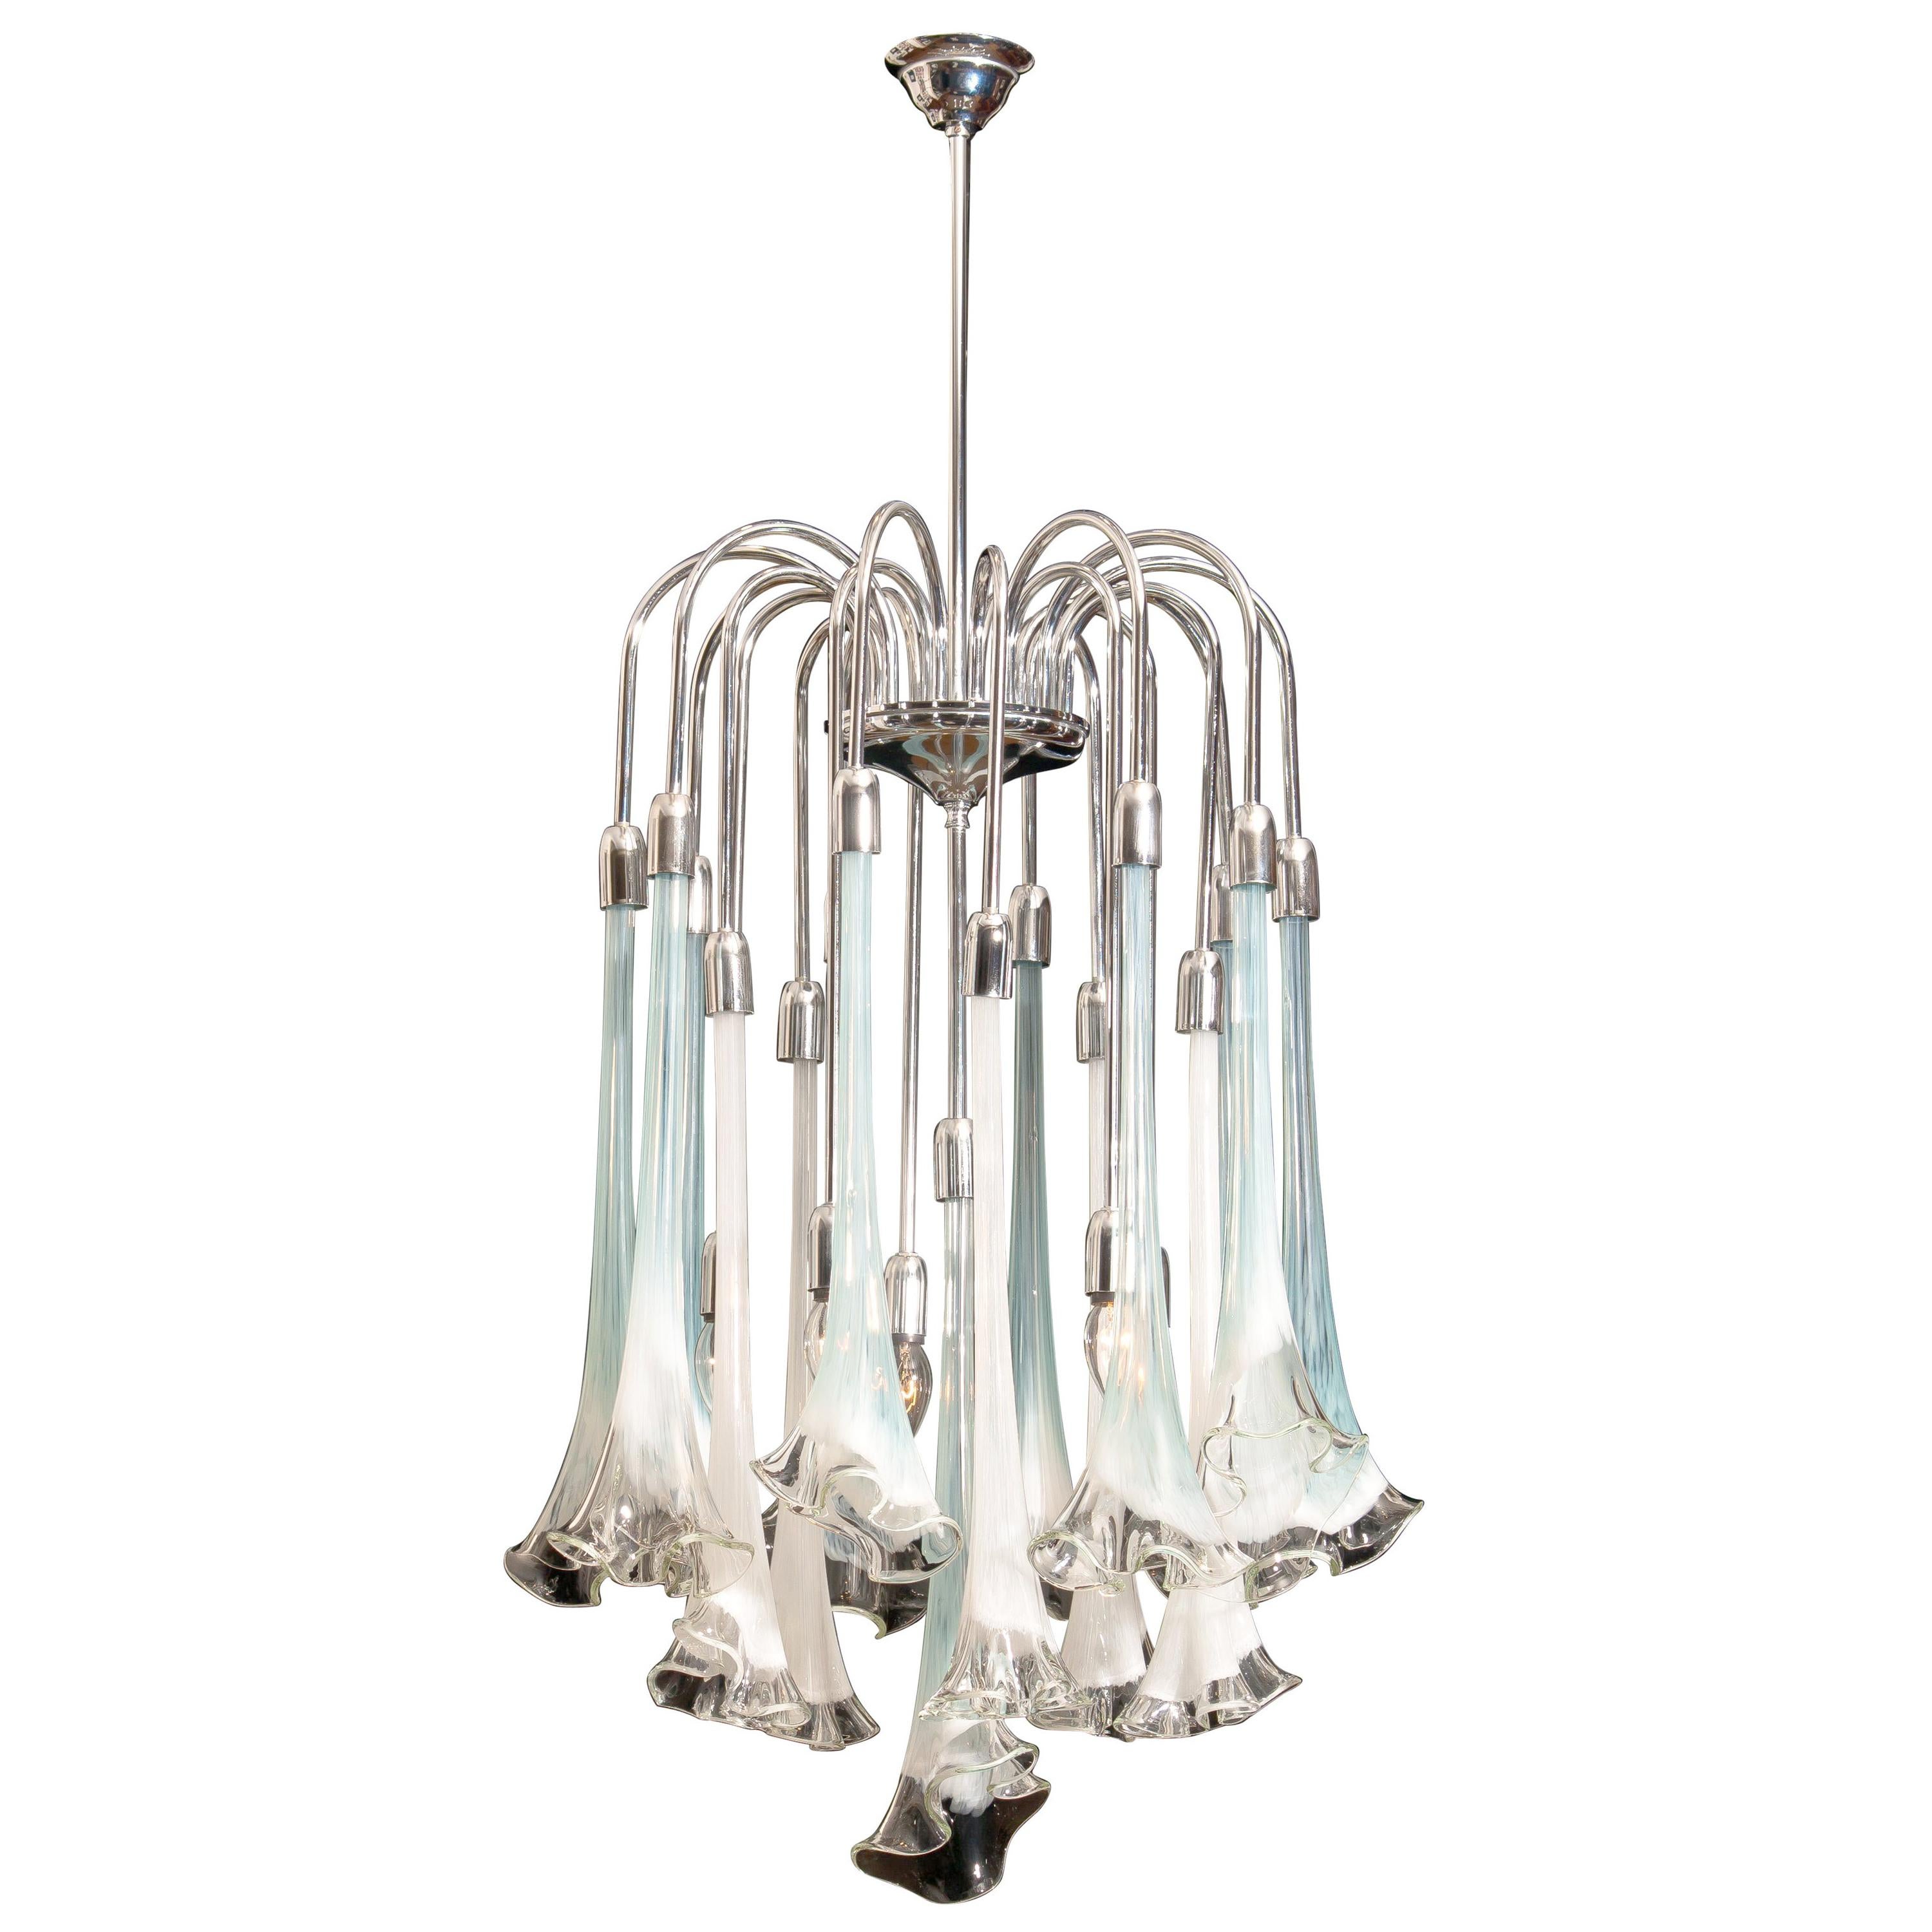 Extremely beautiful and rare Mazzega chandelier filled with Murano art glass.
The 16 large white and turquoise glass flowers are all in excellent condition.
Also, the chrome fixture is perfect. Technically 100%.
The chandelier has five E14 / E17